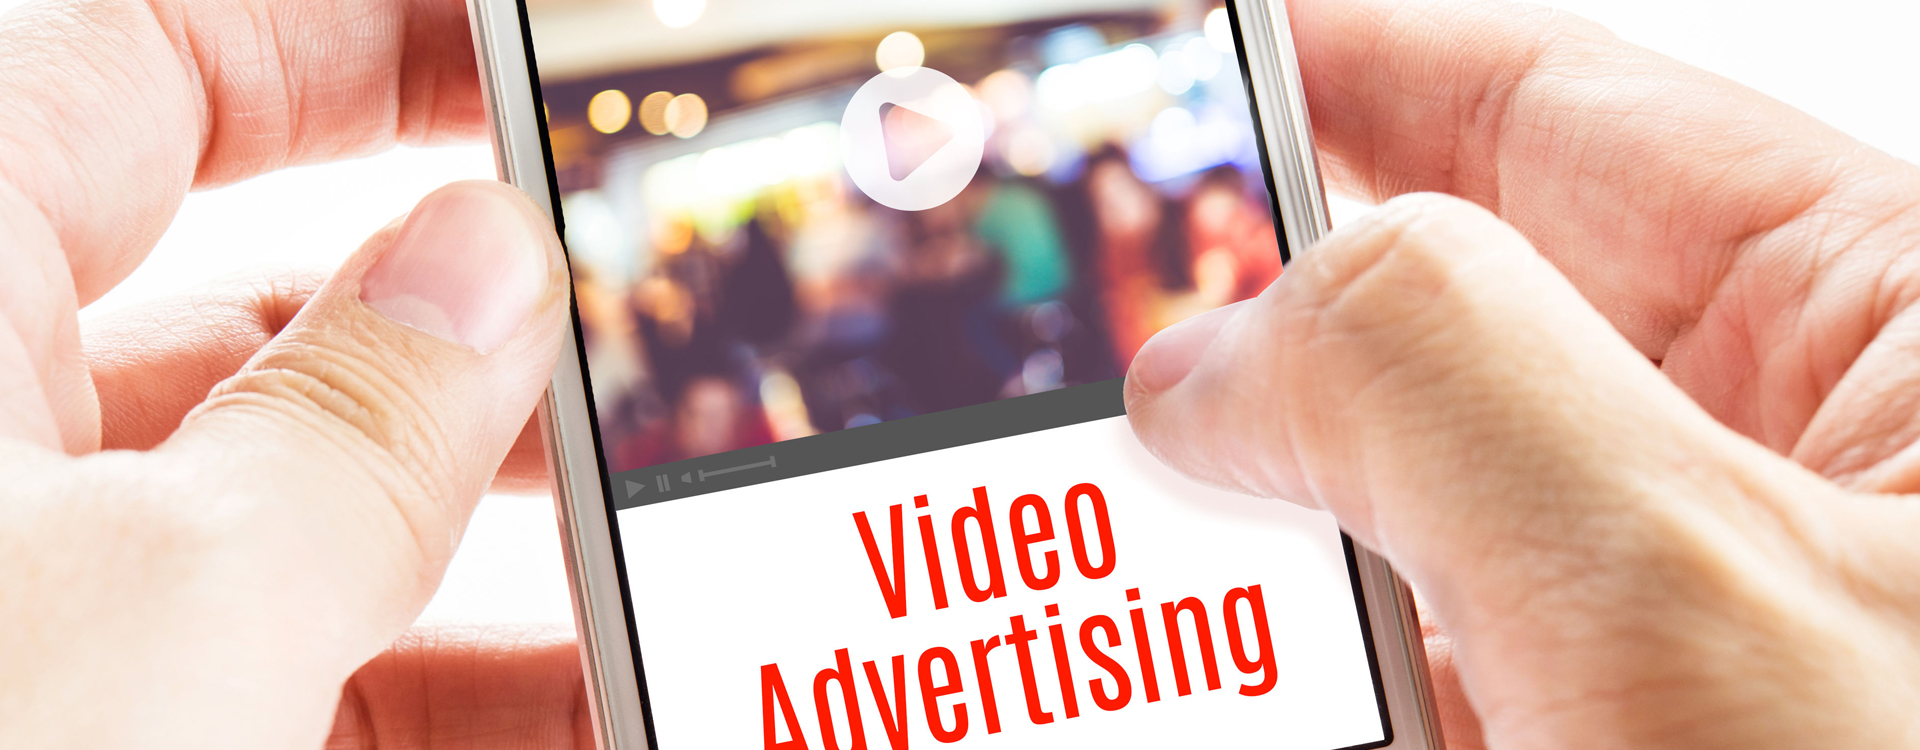 hands holding a mobile phone showing video advertisement